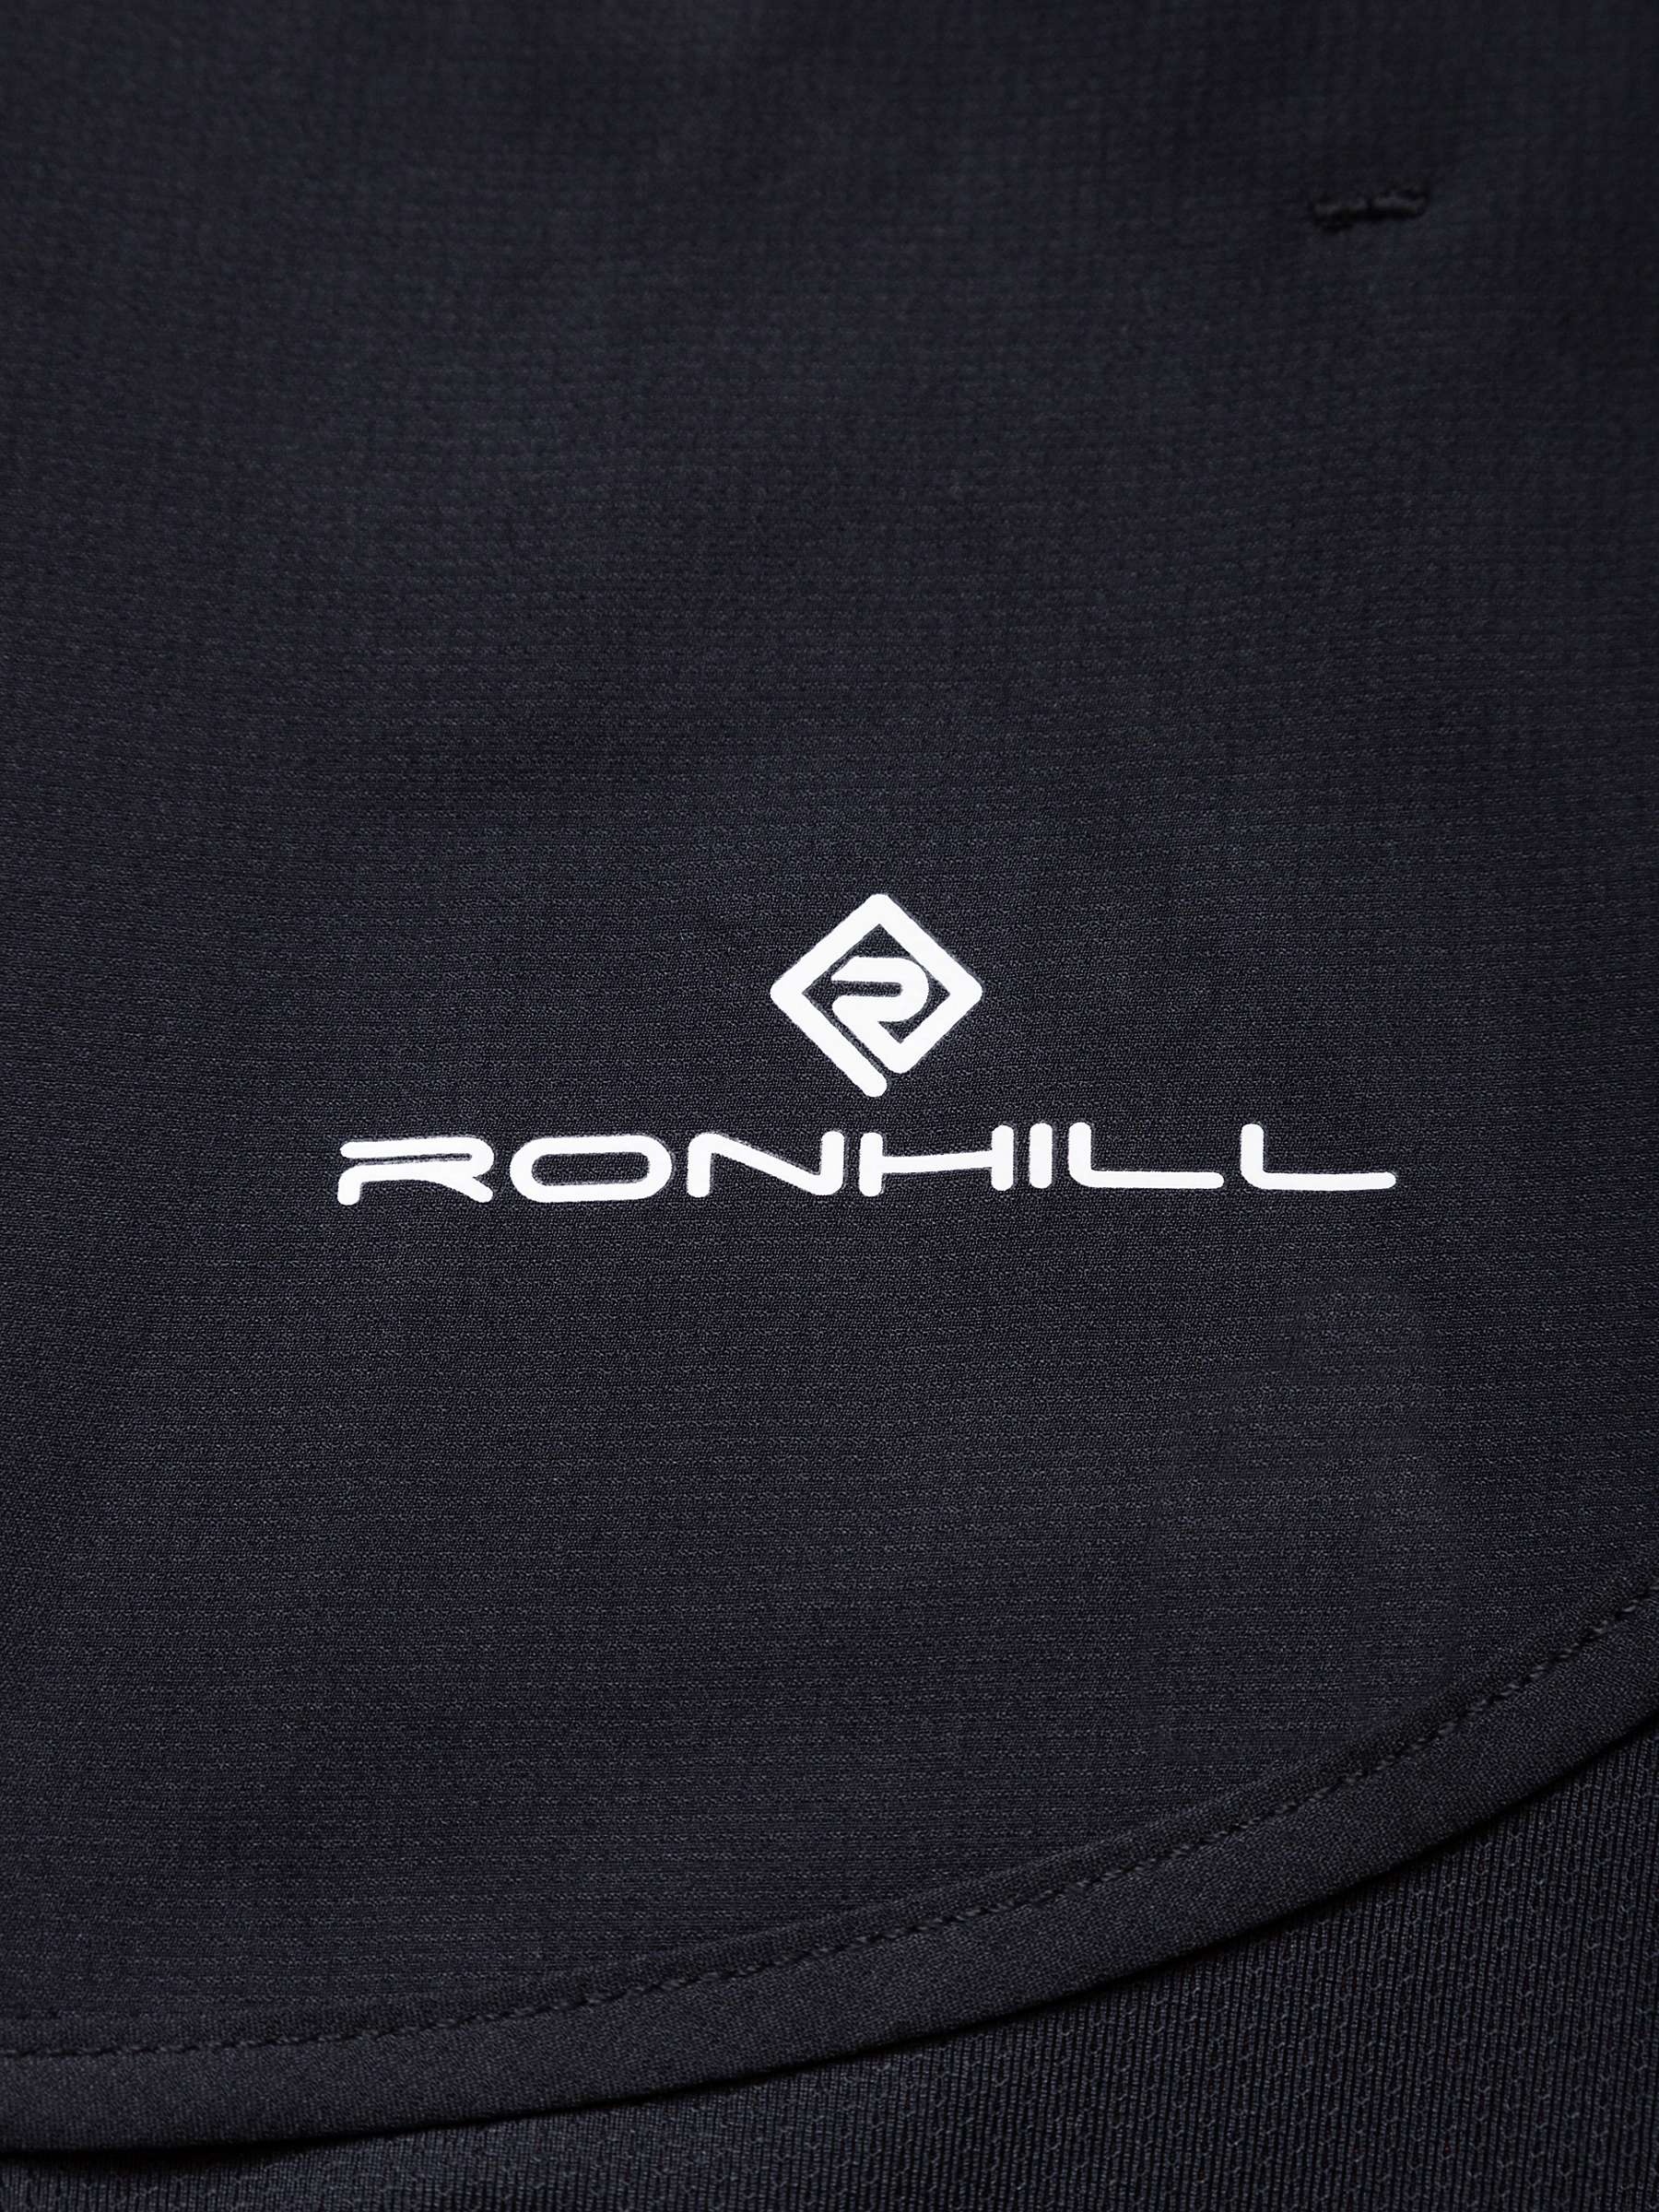 Buy Ronhill Two-in-One Shorts, Black Online at johnlewis.com